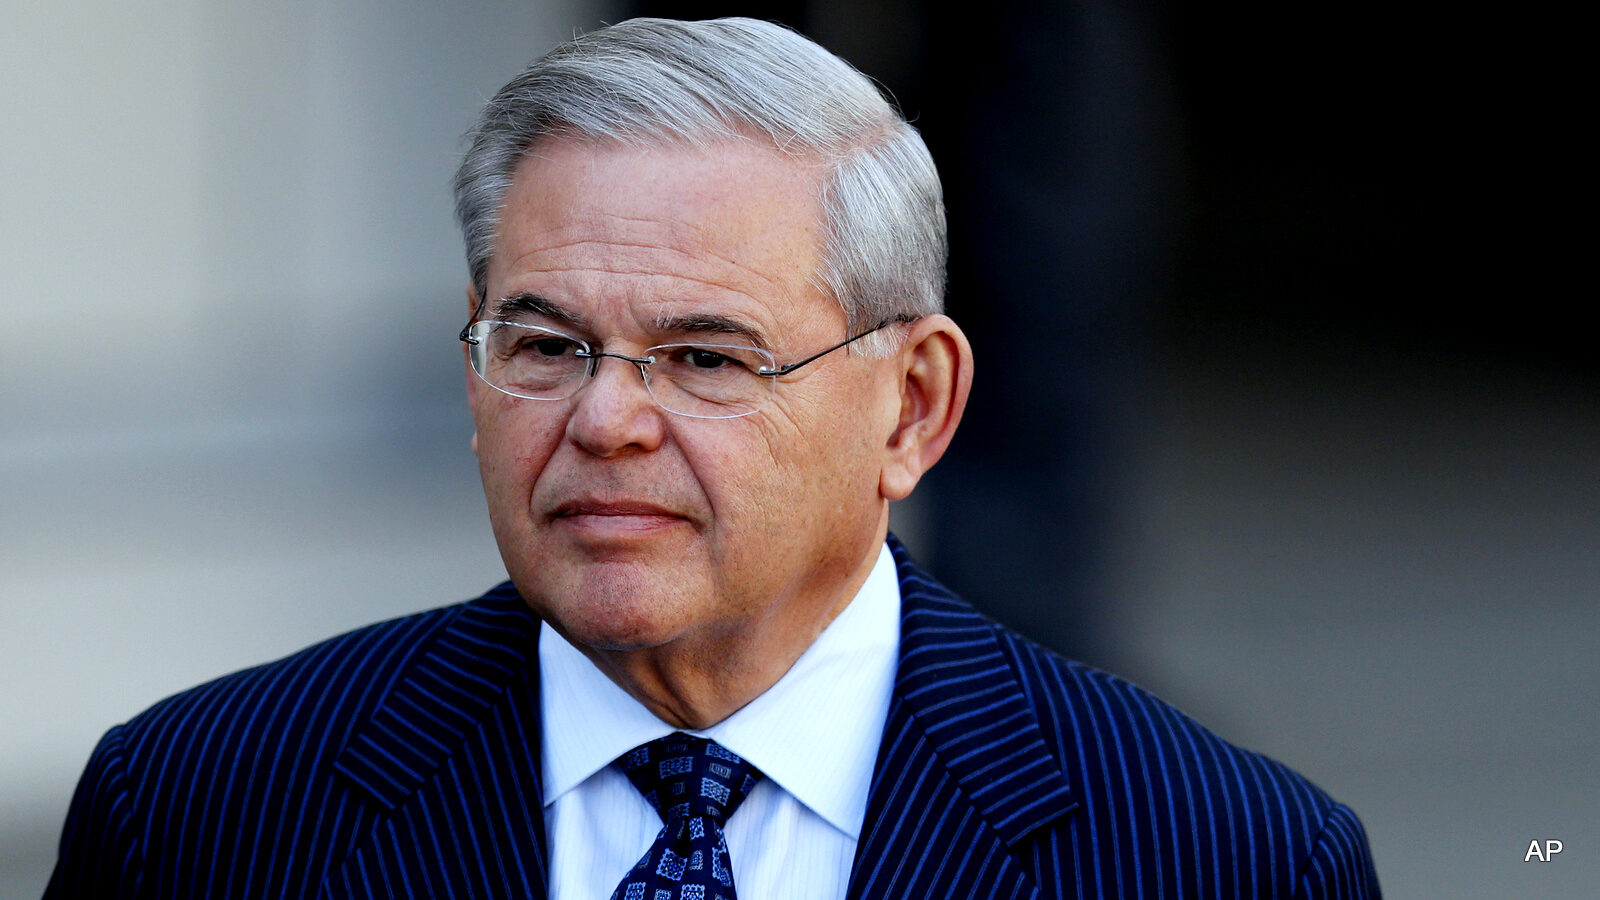 U.S. Sen. Bob Menendez leaves the Martin Luther King Jr. Federal Courthouse after an arraignment in Newark, N.J. Sen. Menendez’s legal defense fund raised nearly $1.3 million up until the day before he was indicted on bribery and corruption charges, including $10,000 from a retired New Jersey developer who served two years in prison for bribery.